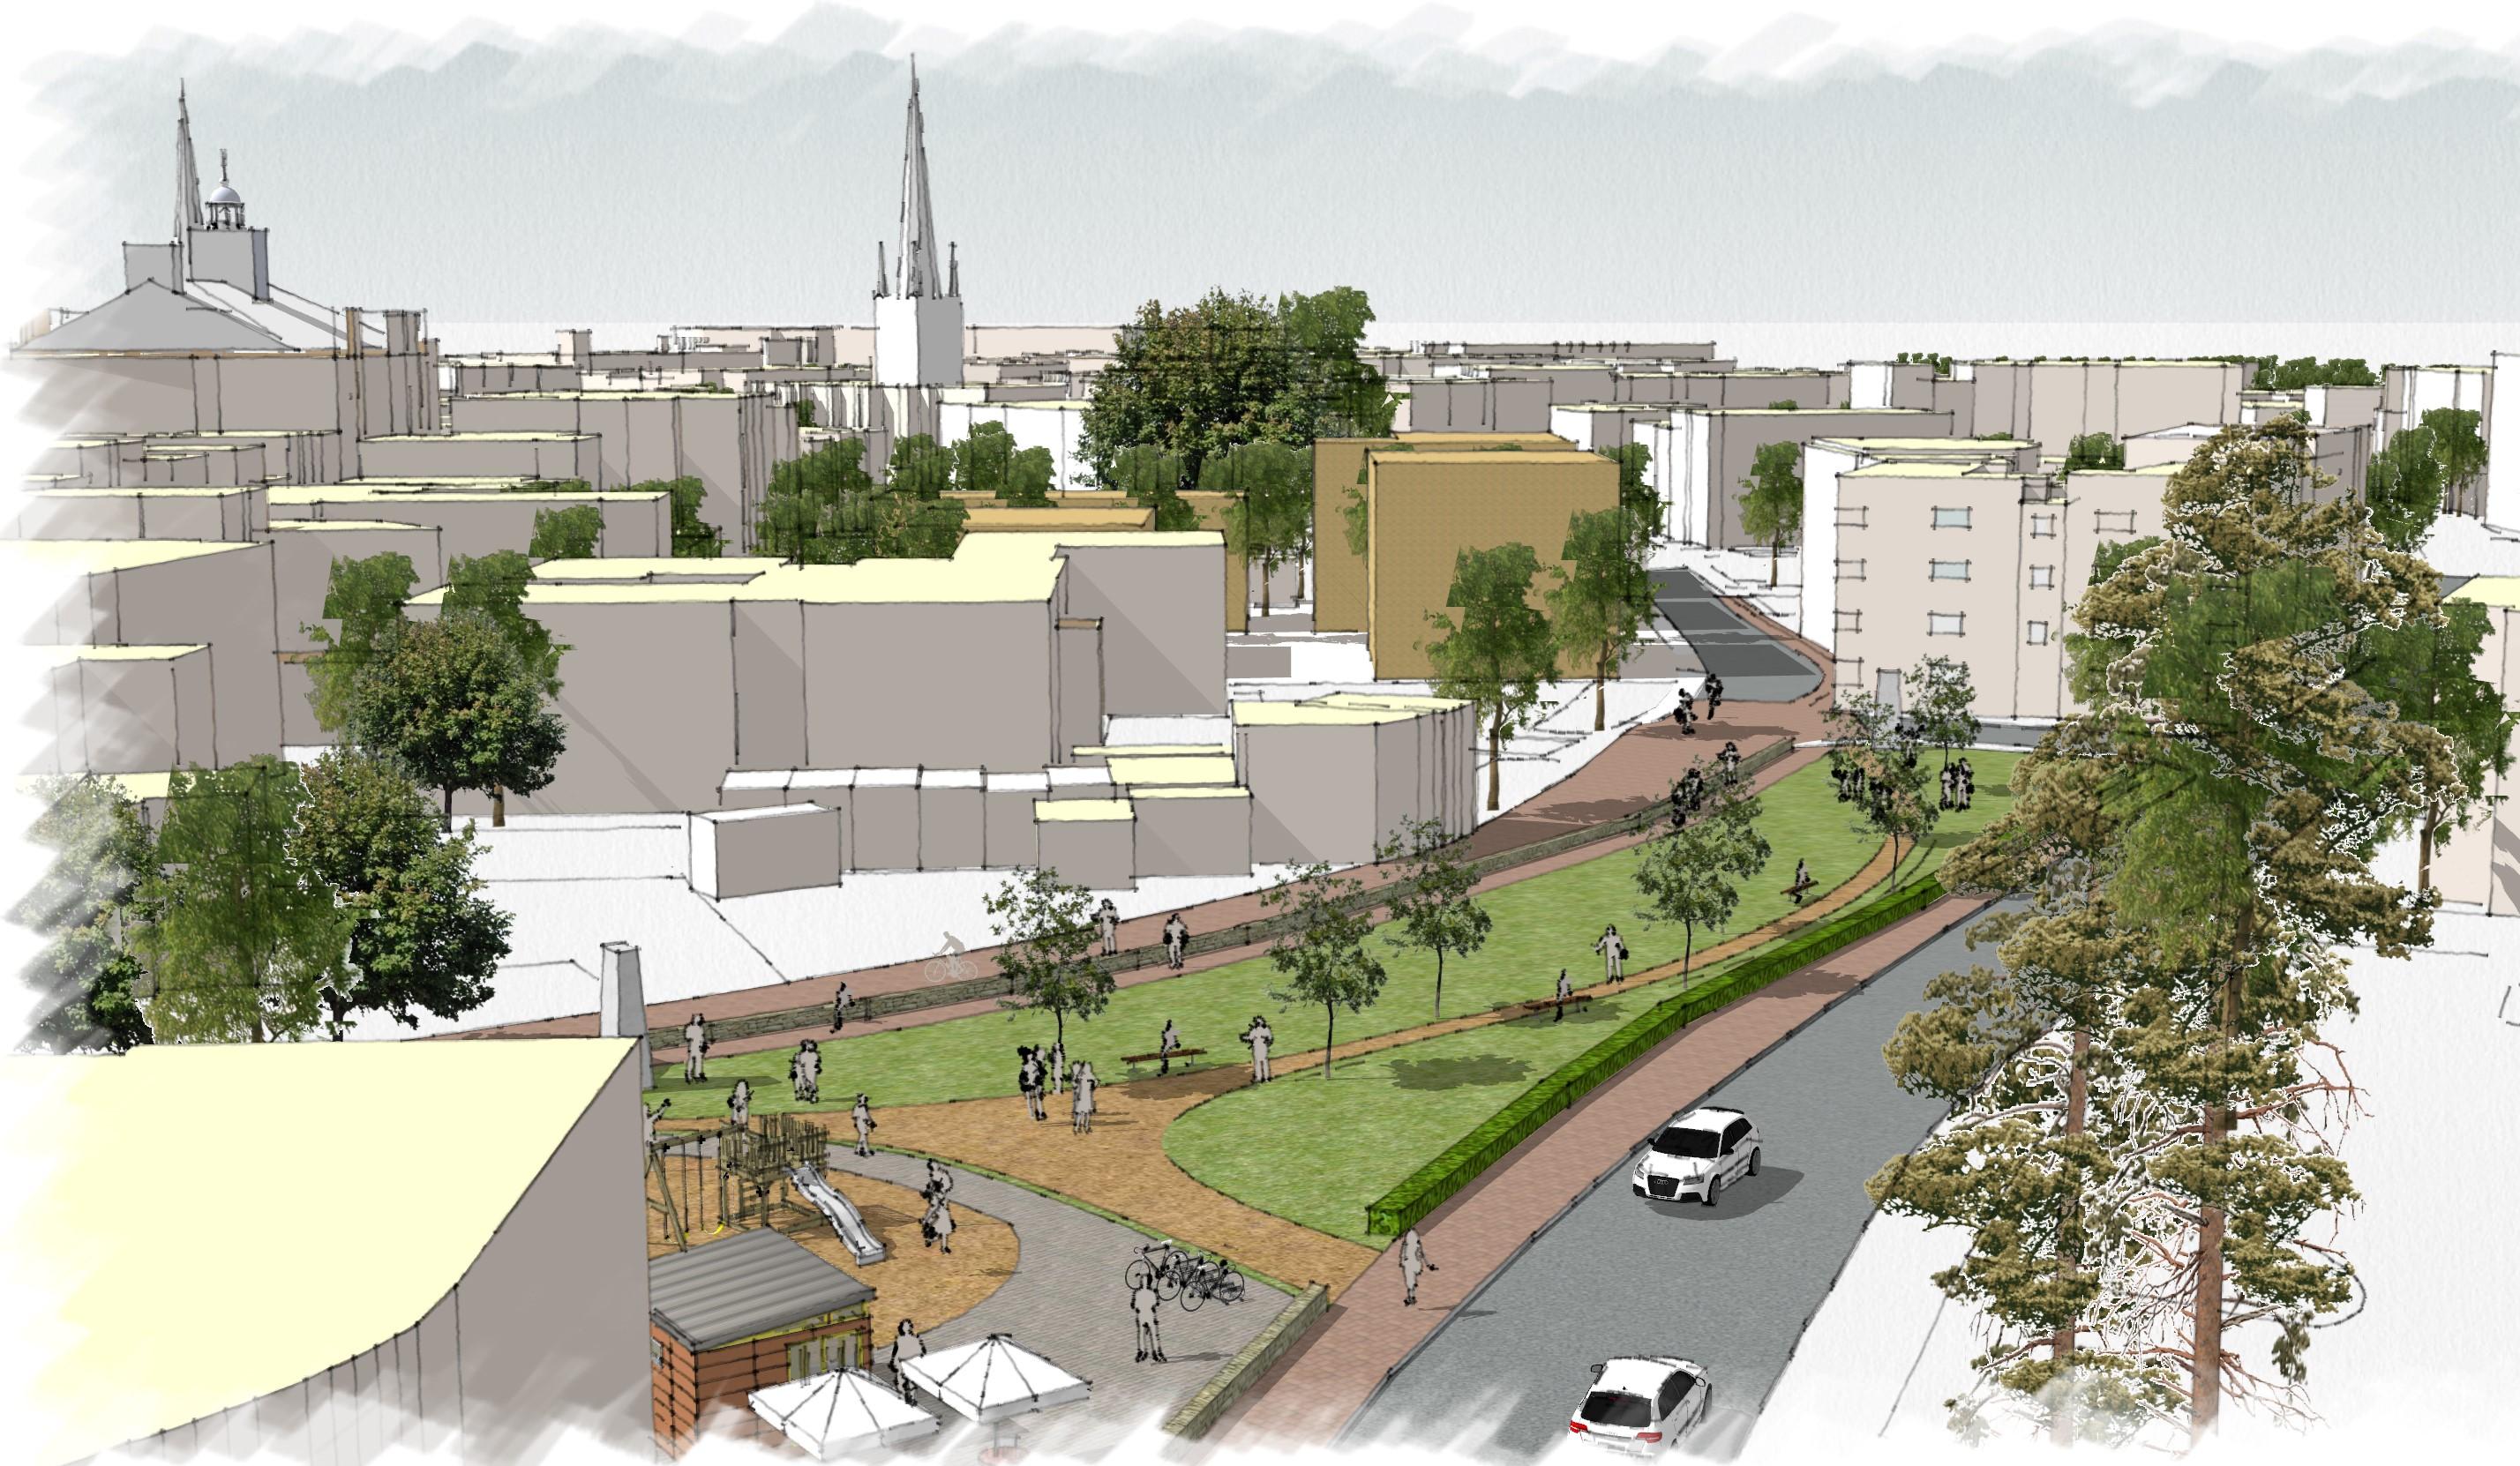 Artists impression of bath street showing new road layout and park